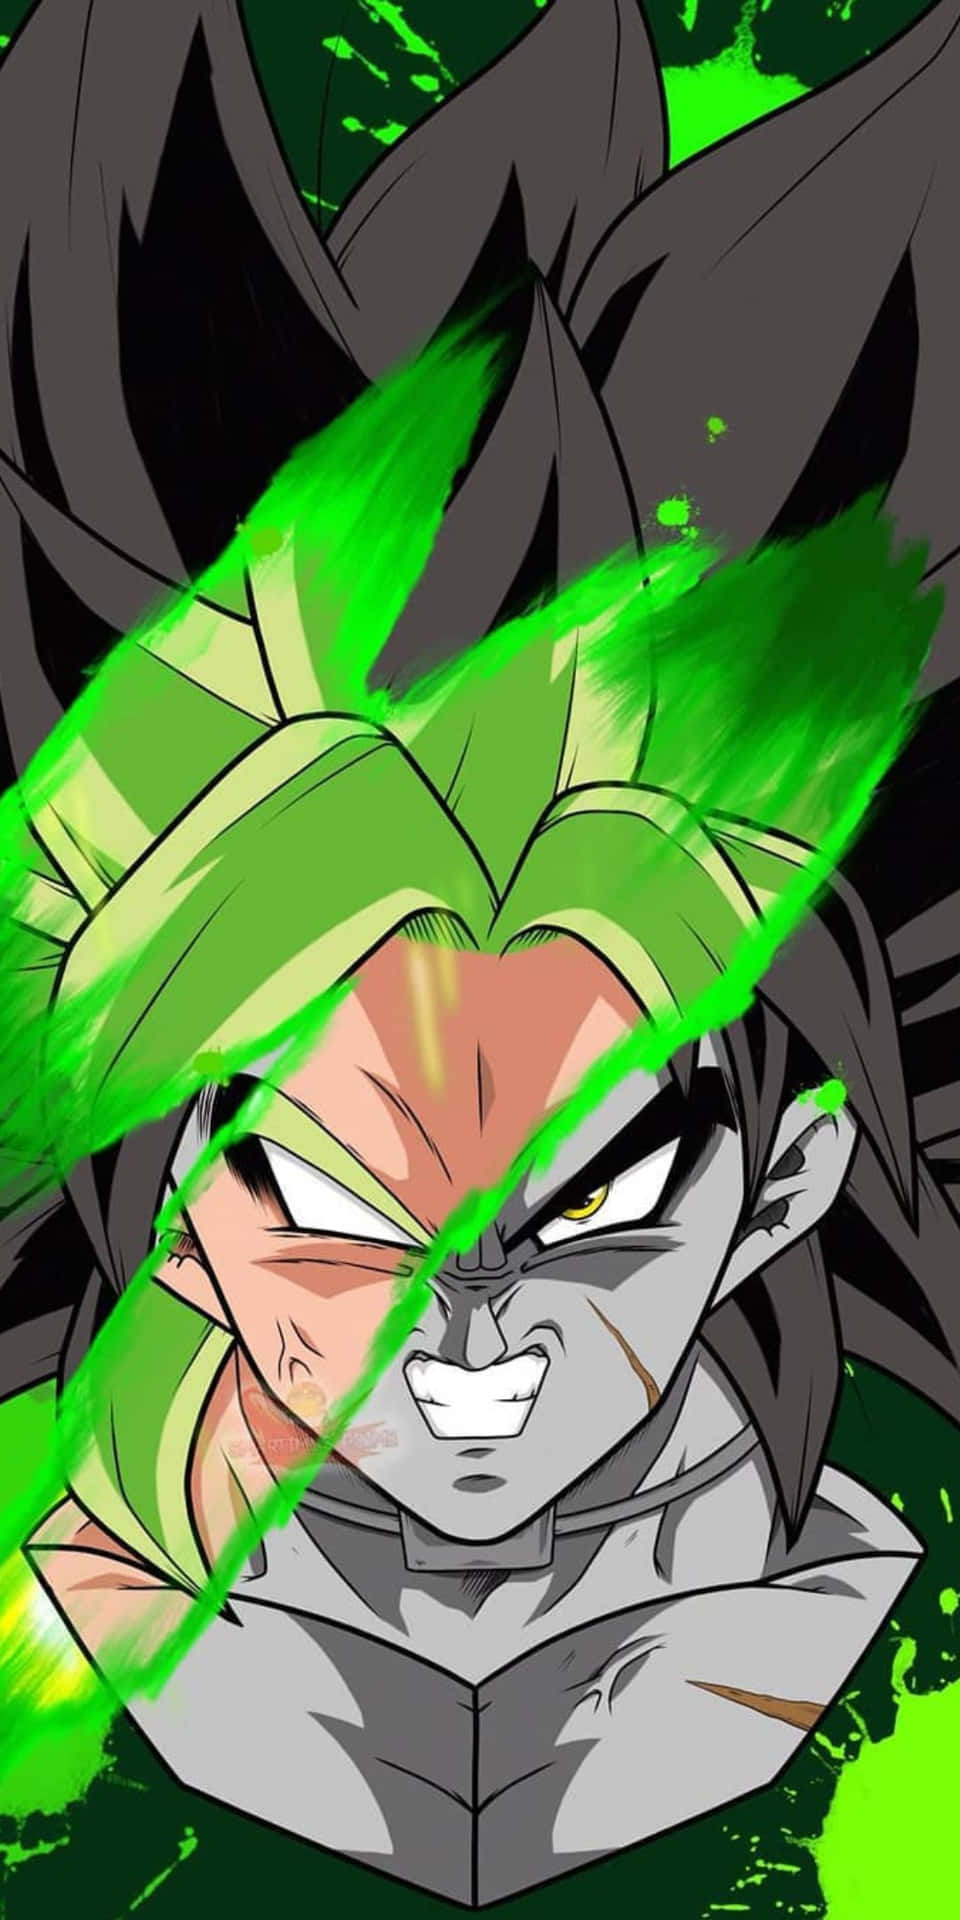 Super Saiyan Broly Transforms and Unleashes His Power